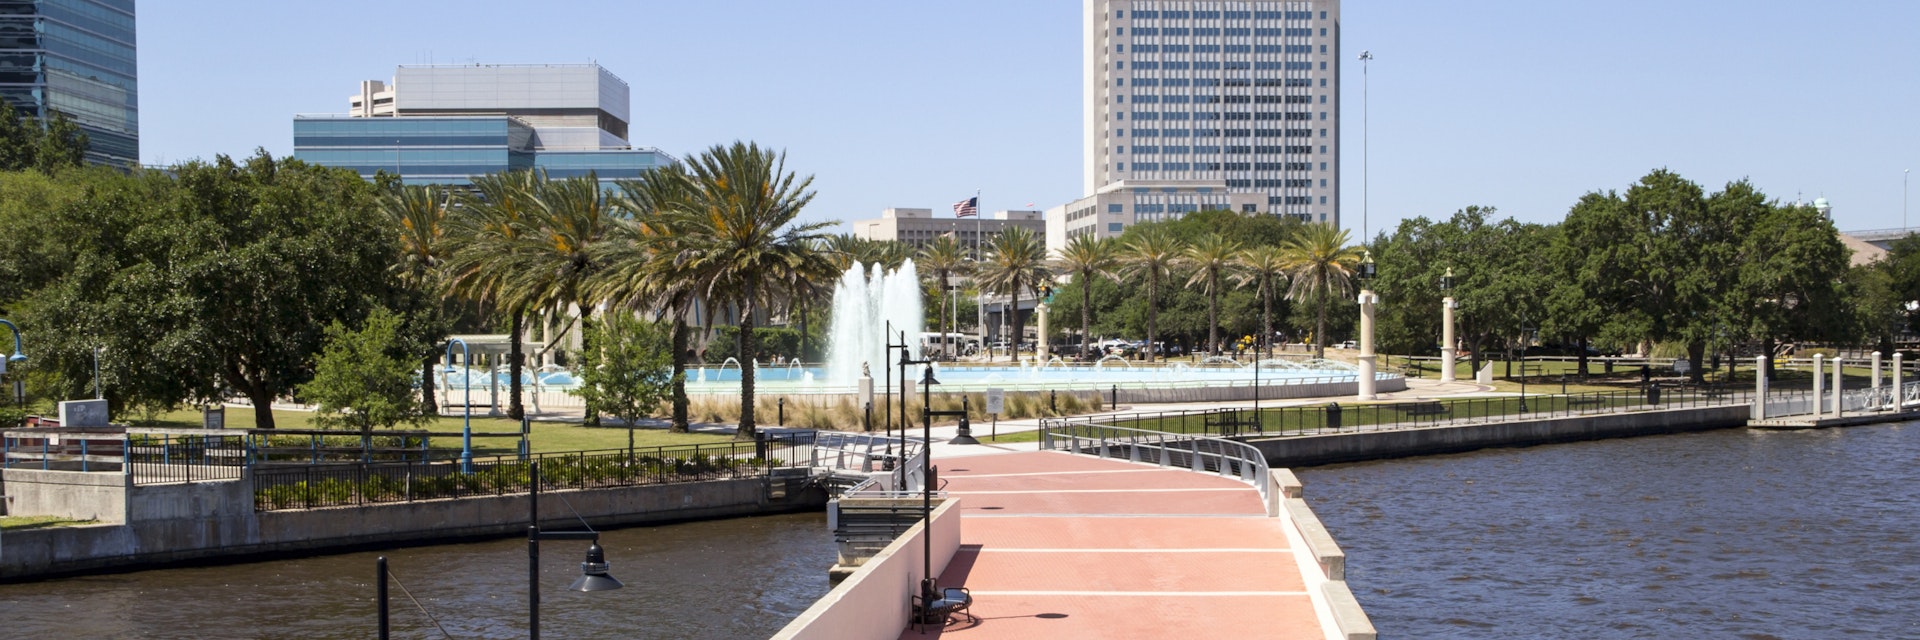 Beautiful Jacksonville, Florida Friendship Fountain and Riverwalk; Shutterstock ID 416055679; Your name (First / Last): Trisha Ping; GL account no.: 65050; Netsuite department name: Online Editorial; Full Product or Project name including edition: Trisha Ping/65050/Online Editorial/Florida